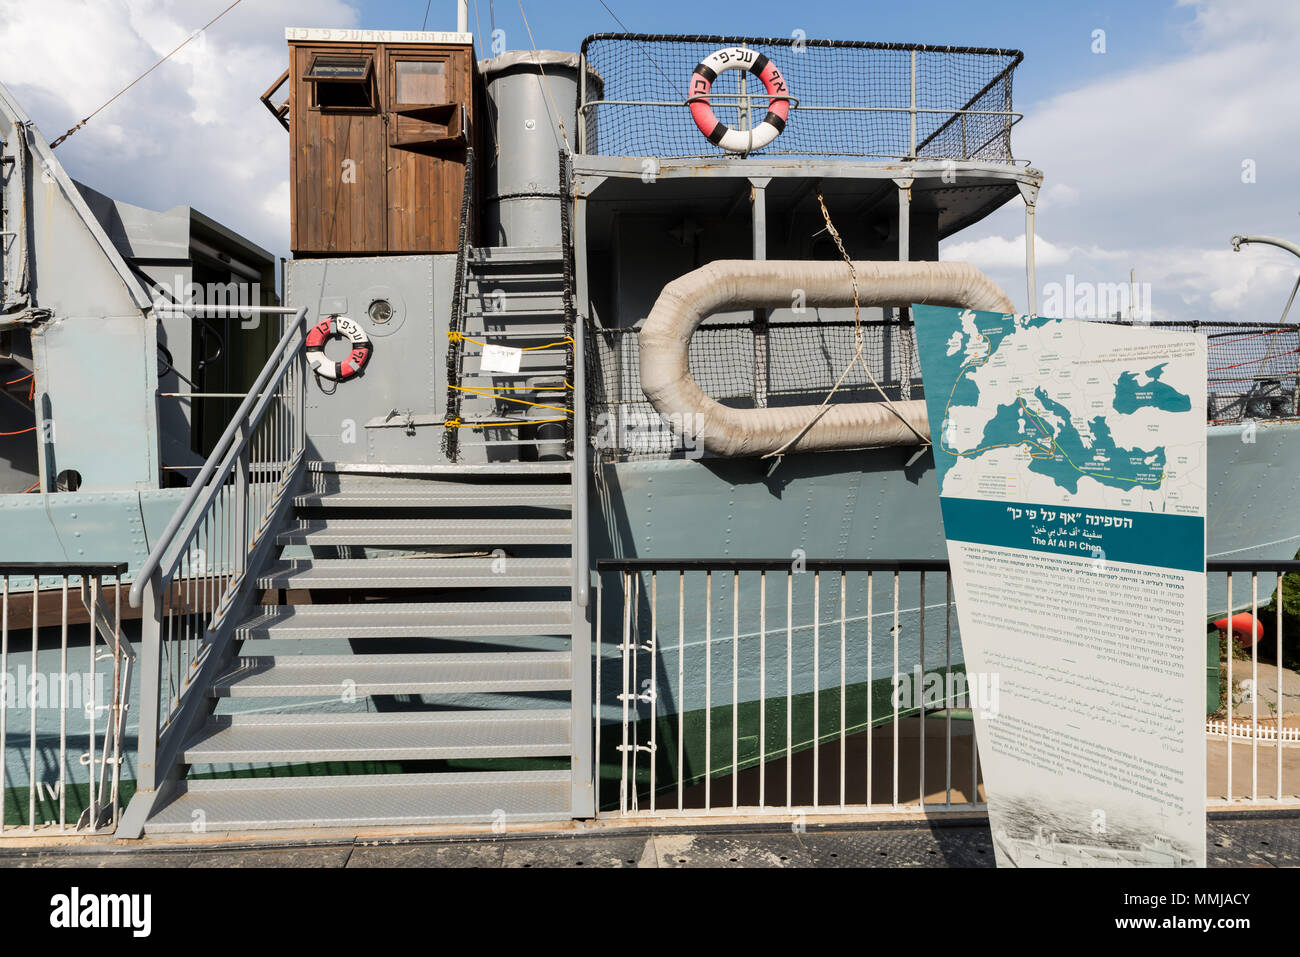 Clandestine Immigration and Naval Museum in Haifa, Israel Stock Photo